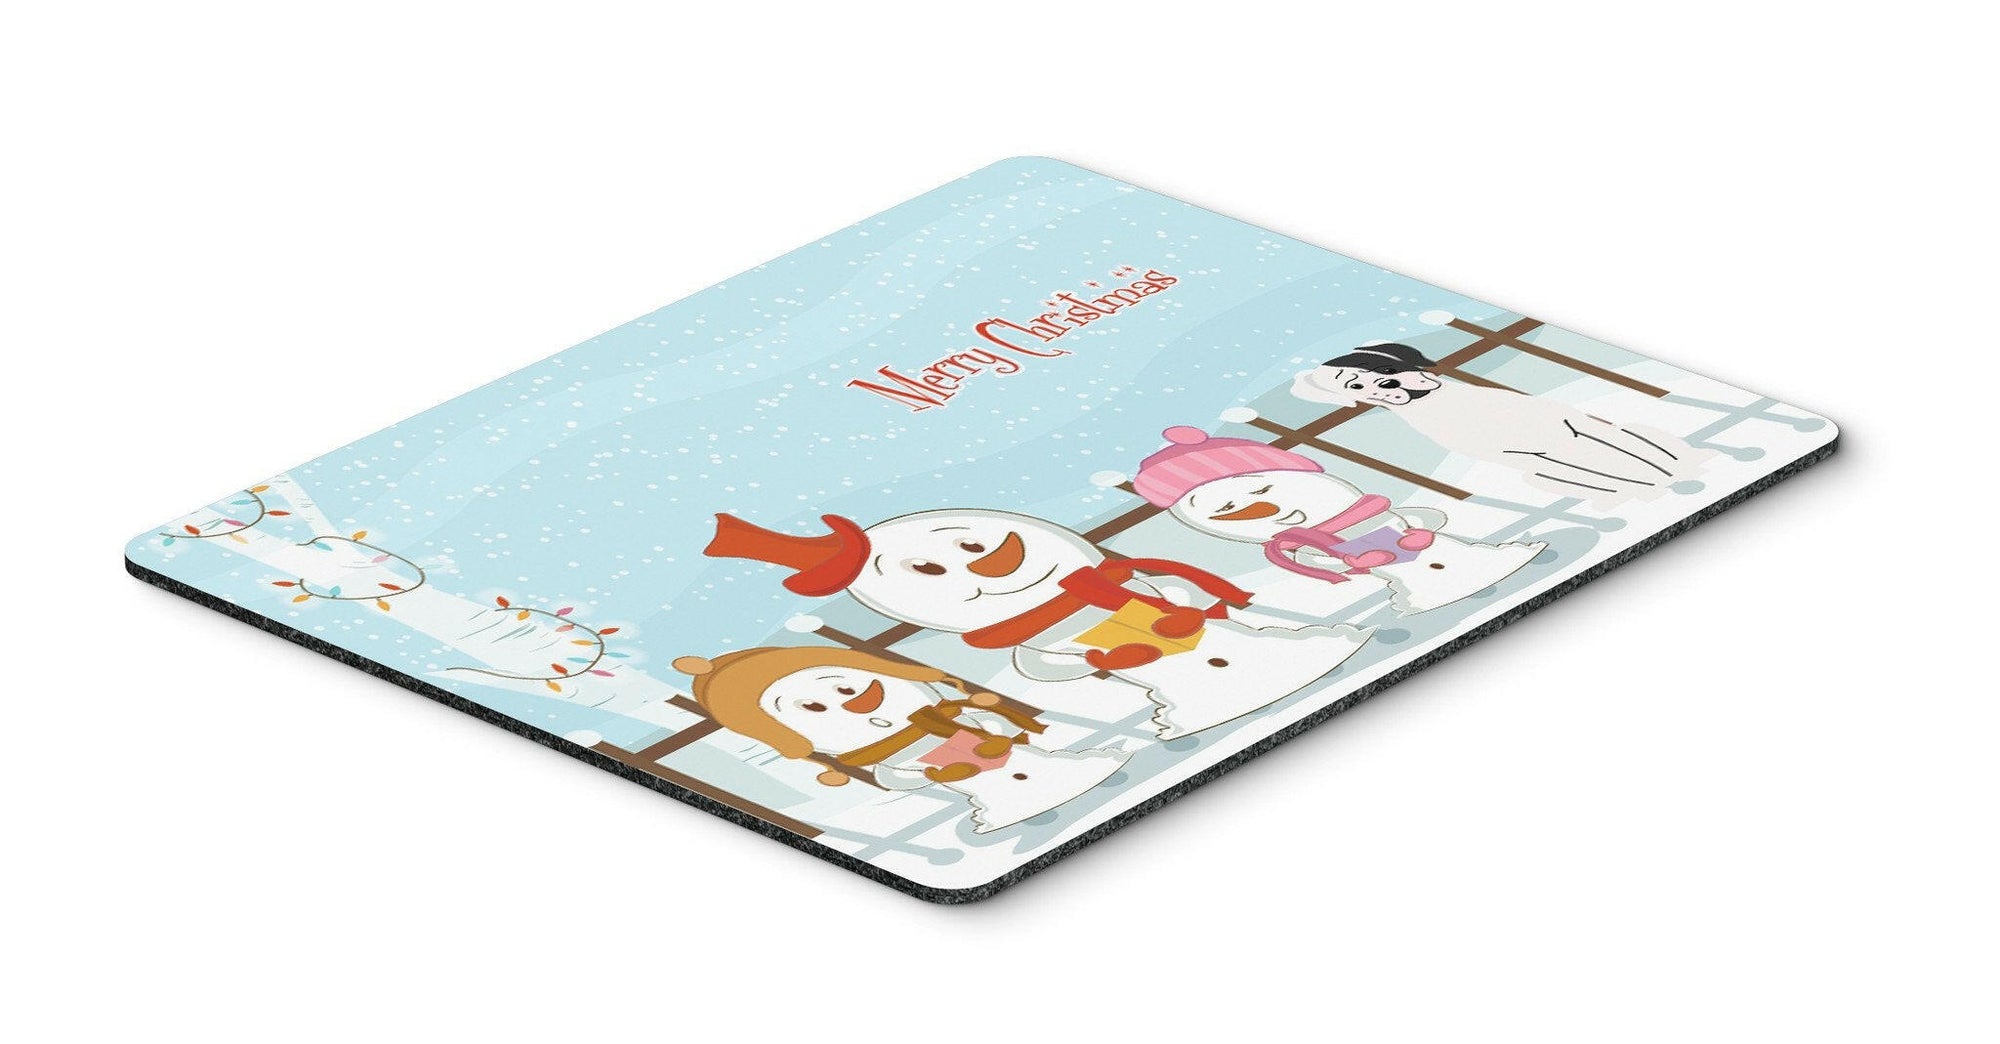 Merry Christmas Carolers White Boxer Cooper Mouse Pad, Hot Pad or Trivet BB2445MP by Caroline's Treasures